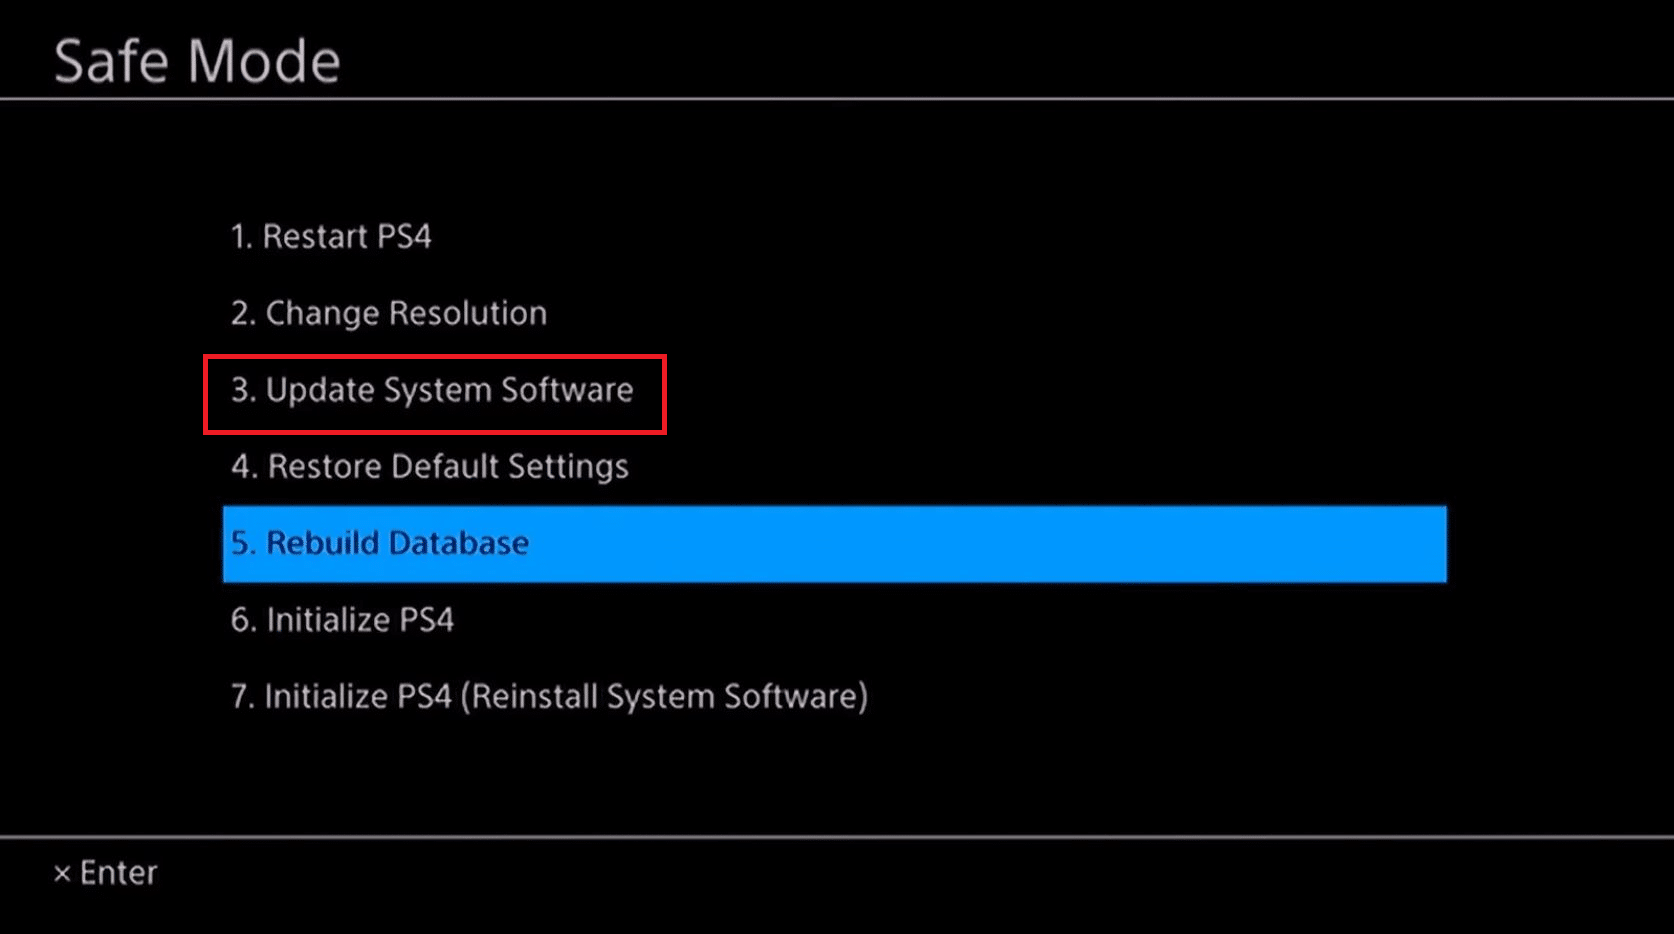 select the Update System Software option numbered as third in the list